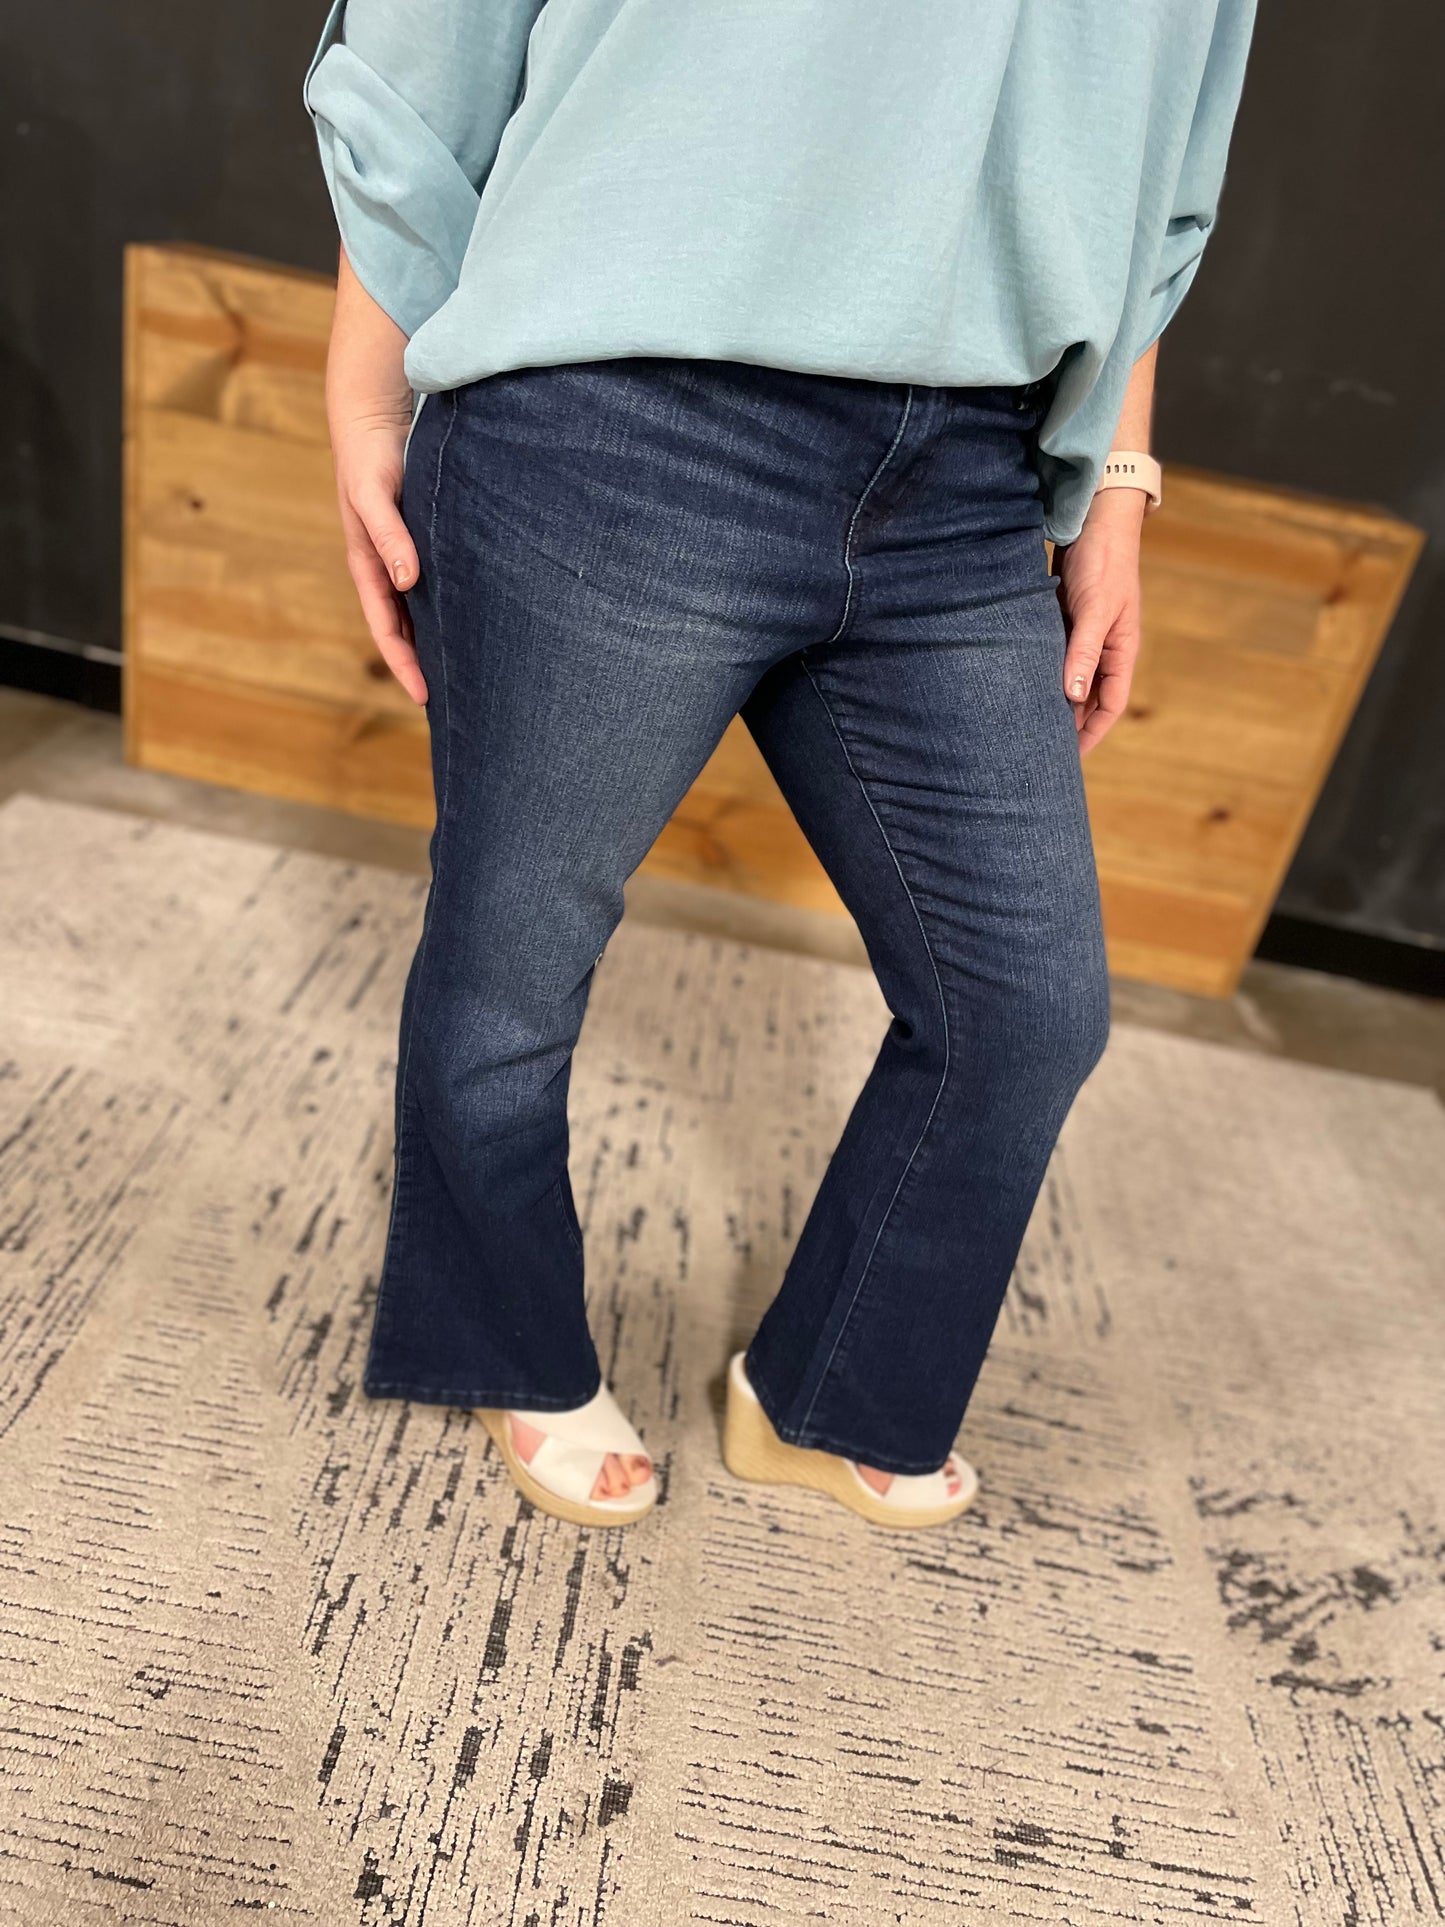 PETITE Penelope 29" Mid-Rise Boot Jeans